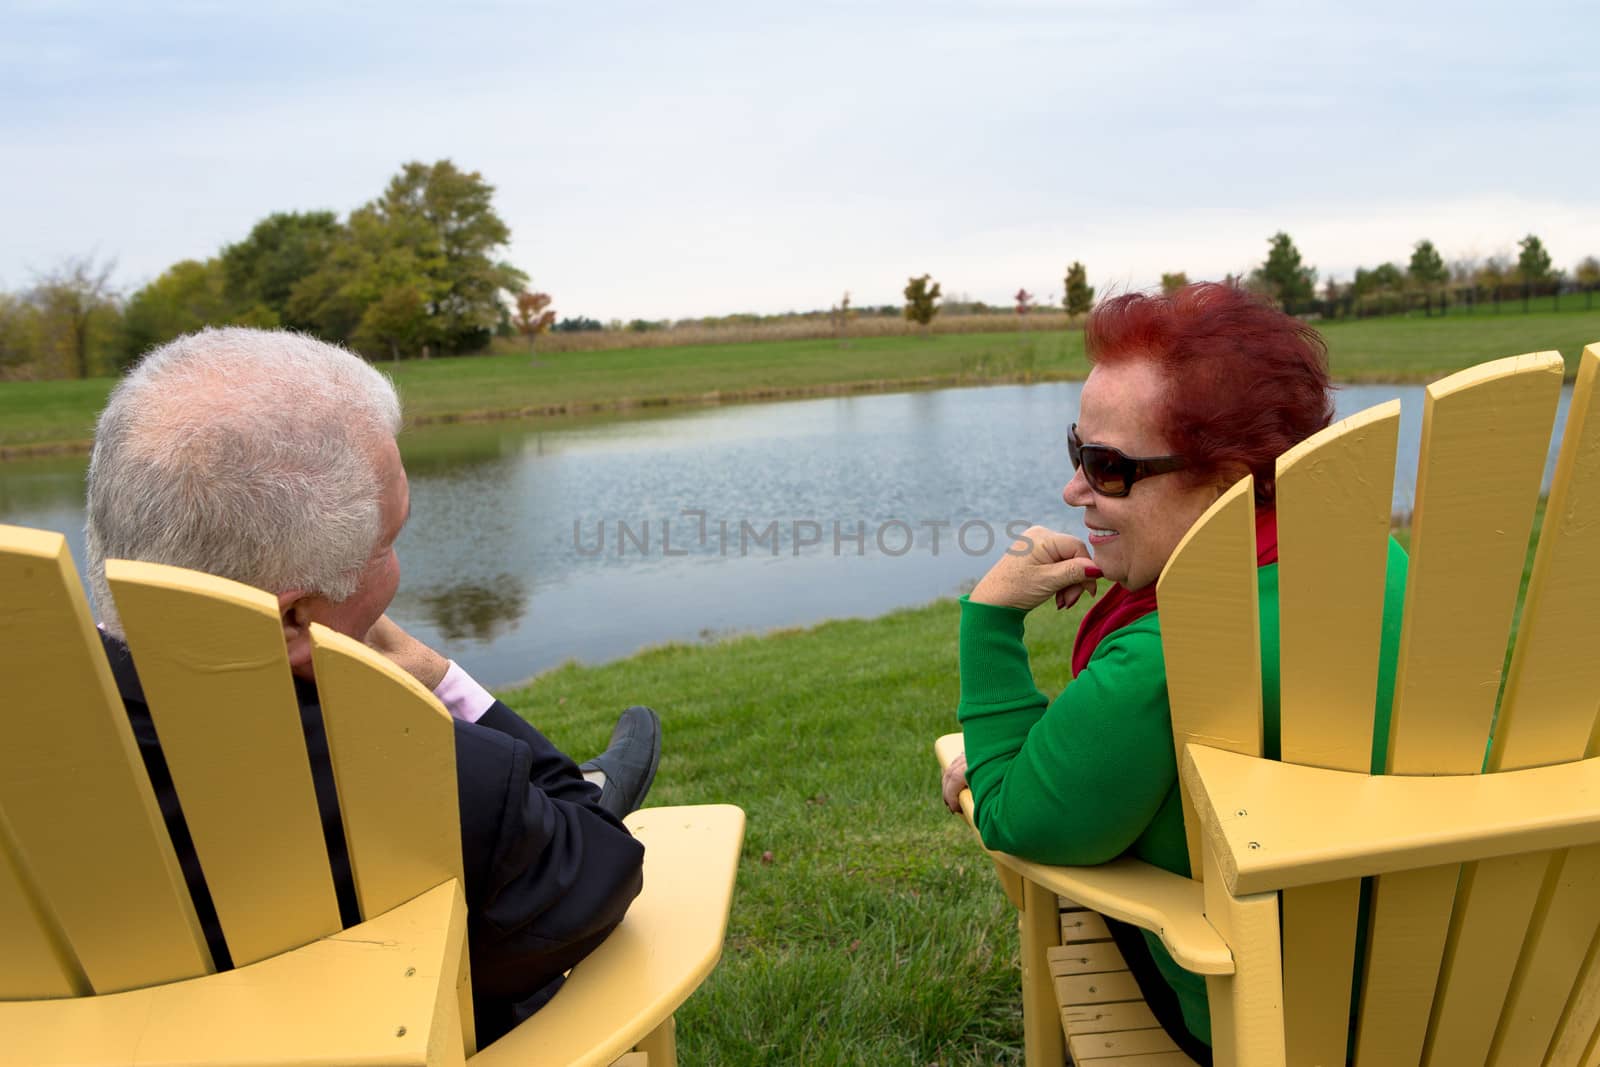 Senior Couple enjoying their togetherness by the pond on the yellow beach chairs